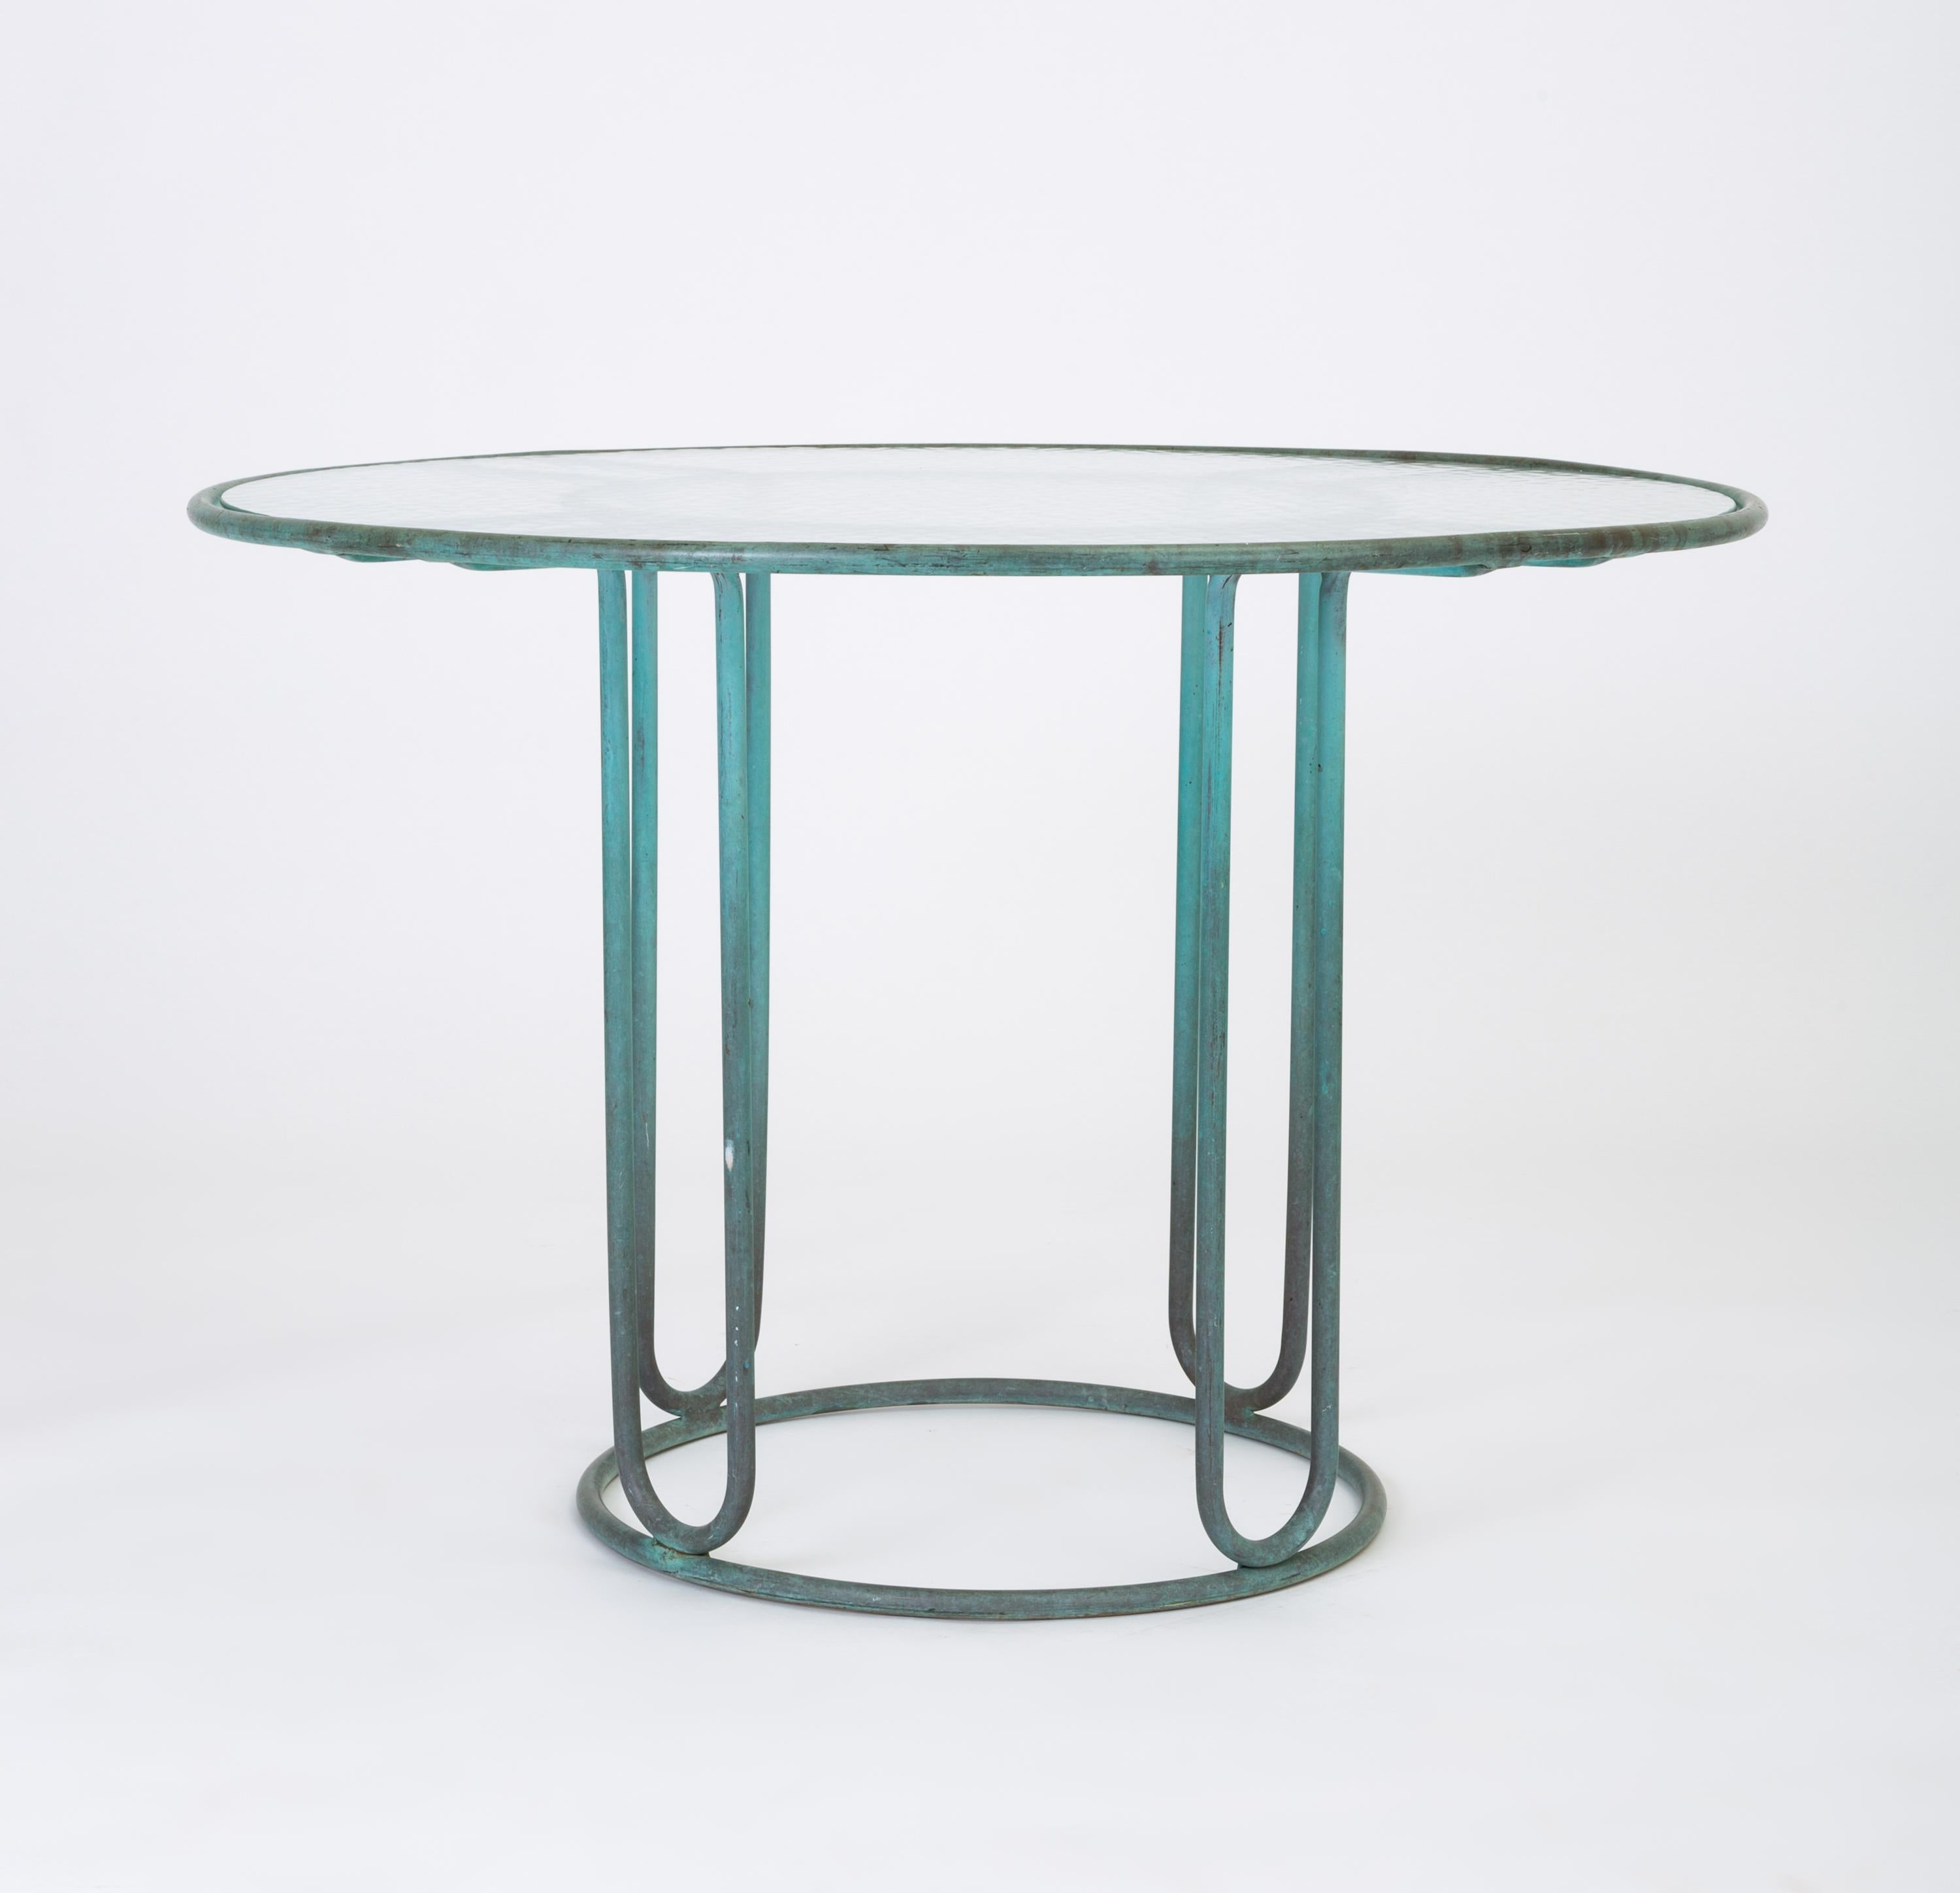 American Walter Lamb Round Patio Dining Table with Glass Top